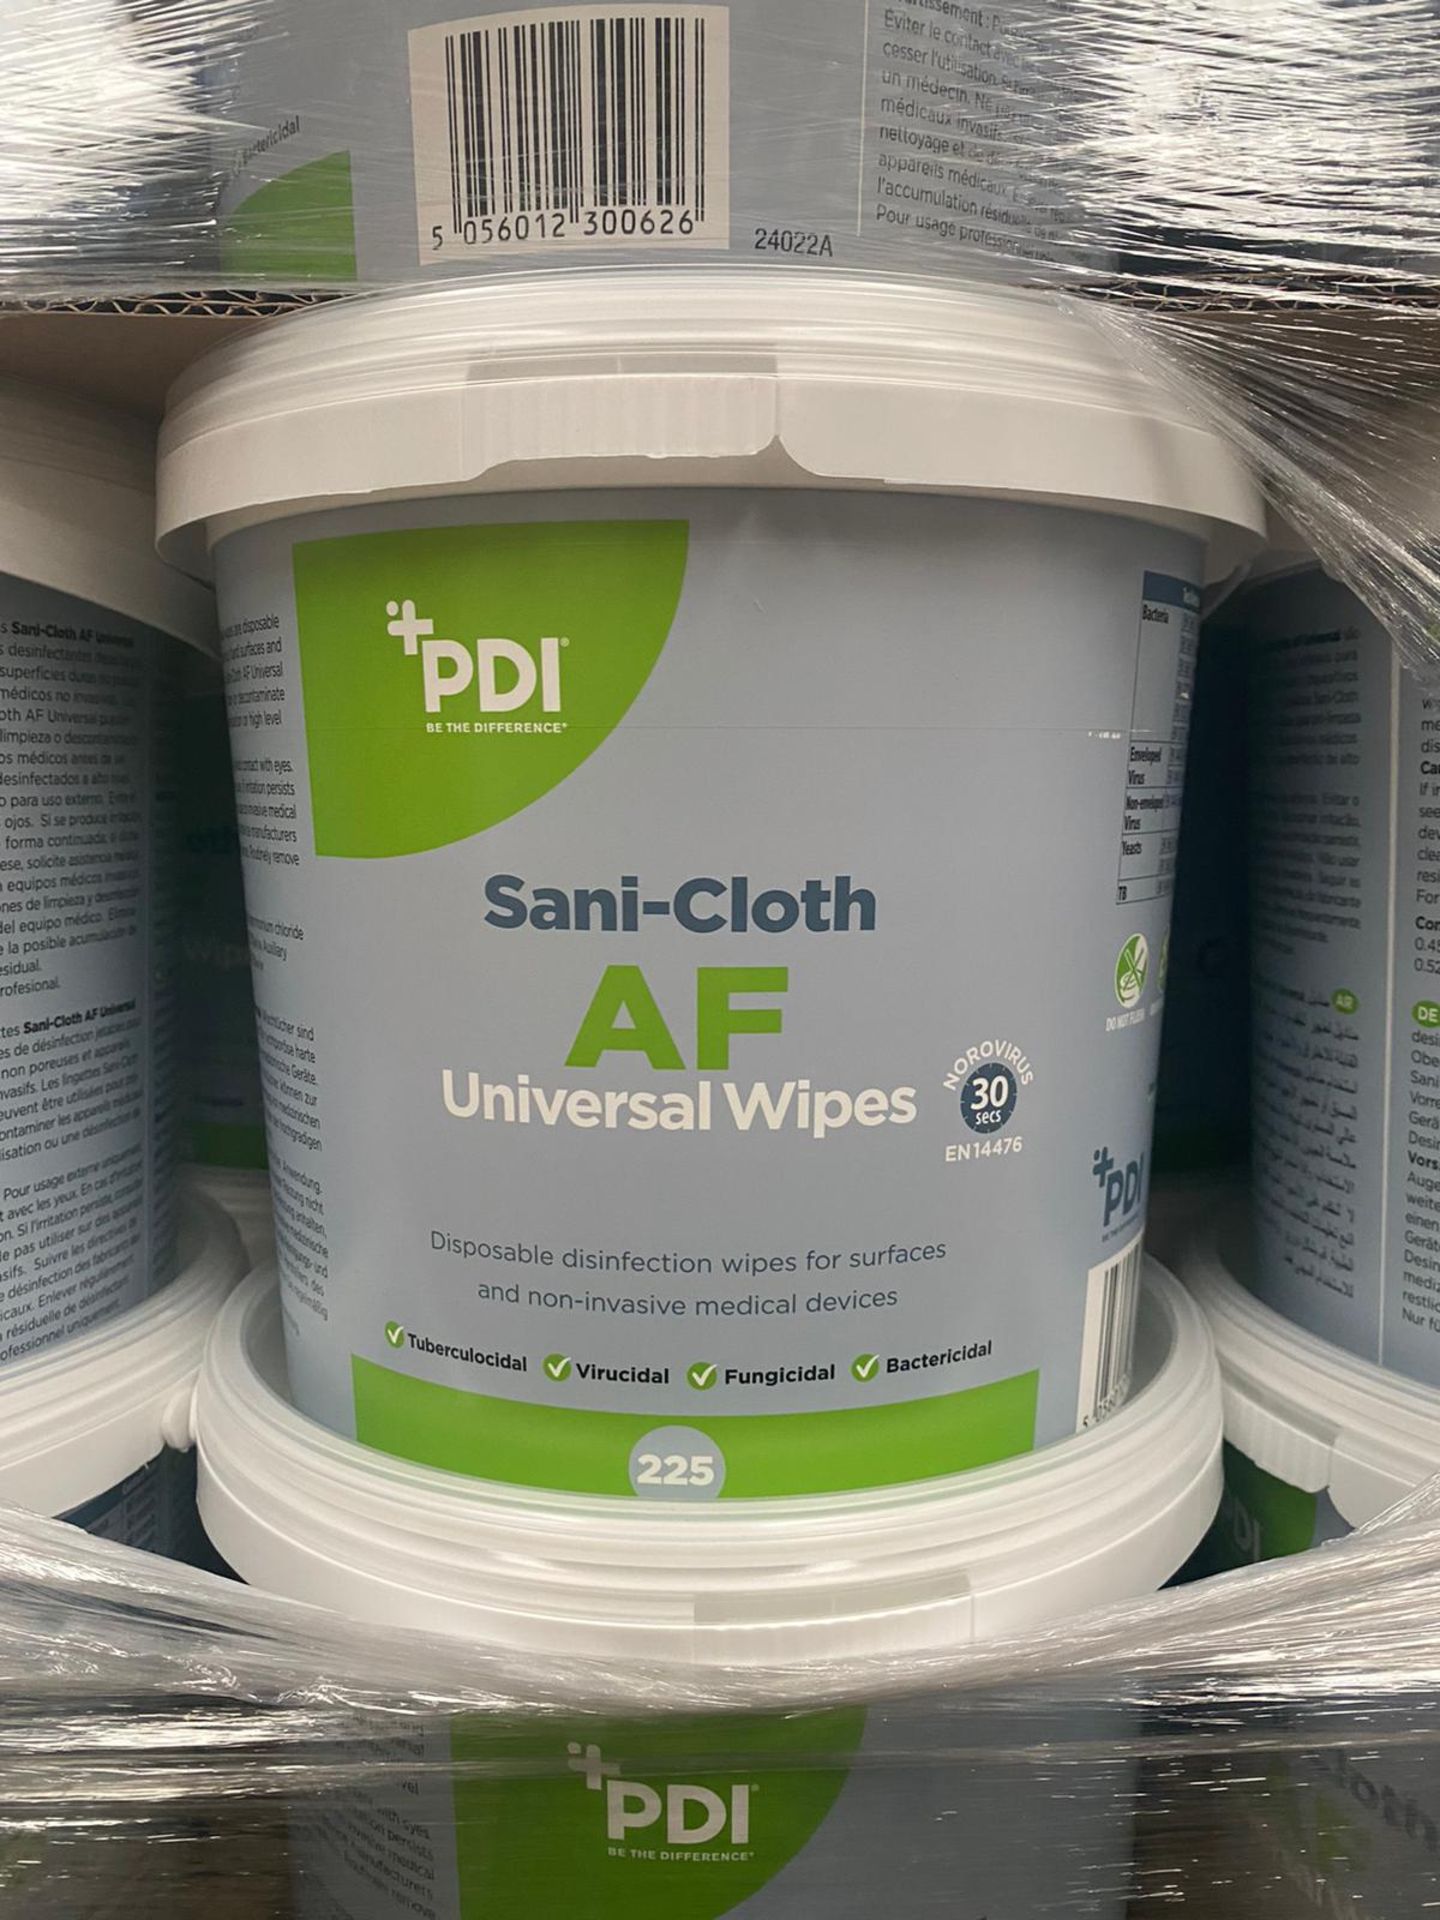 PDI SANI-CLOTH ALCOHOL-FREE UNIVERSAL WIPES BUCKET OF 225 WIPES (192 BUCKETS ON A PALLET)